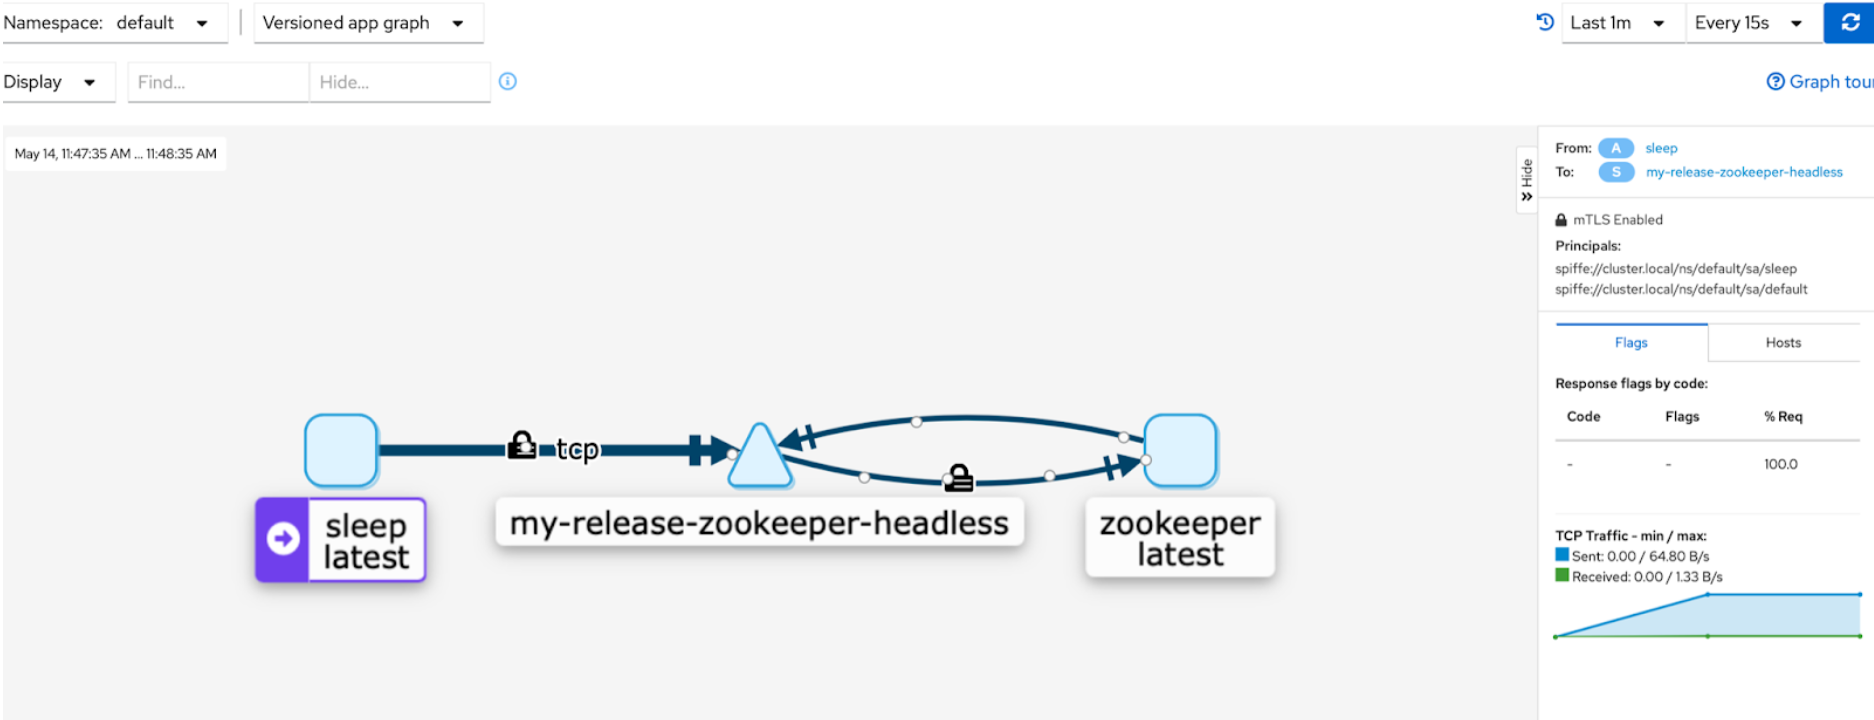 Visualize the ZooKeeper Services in Kiali